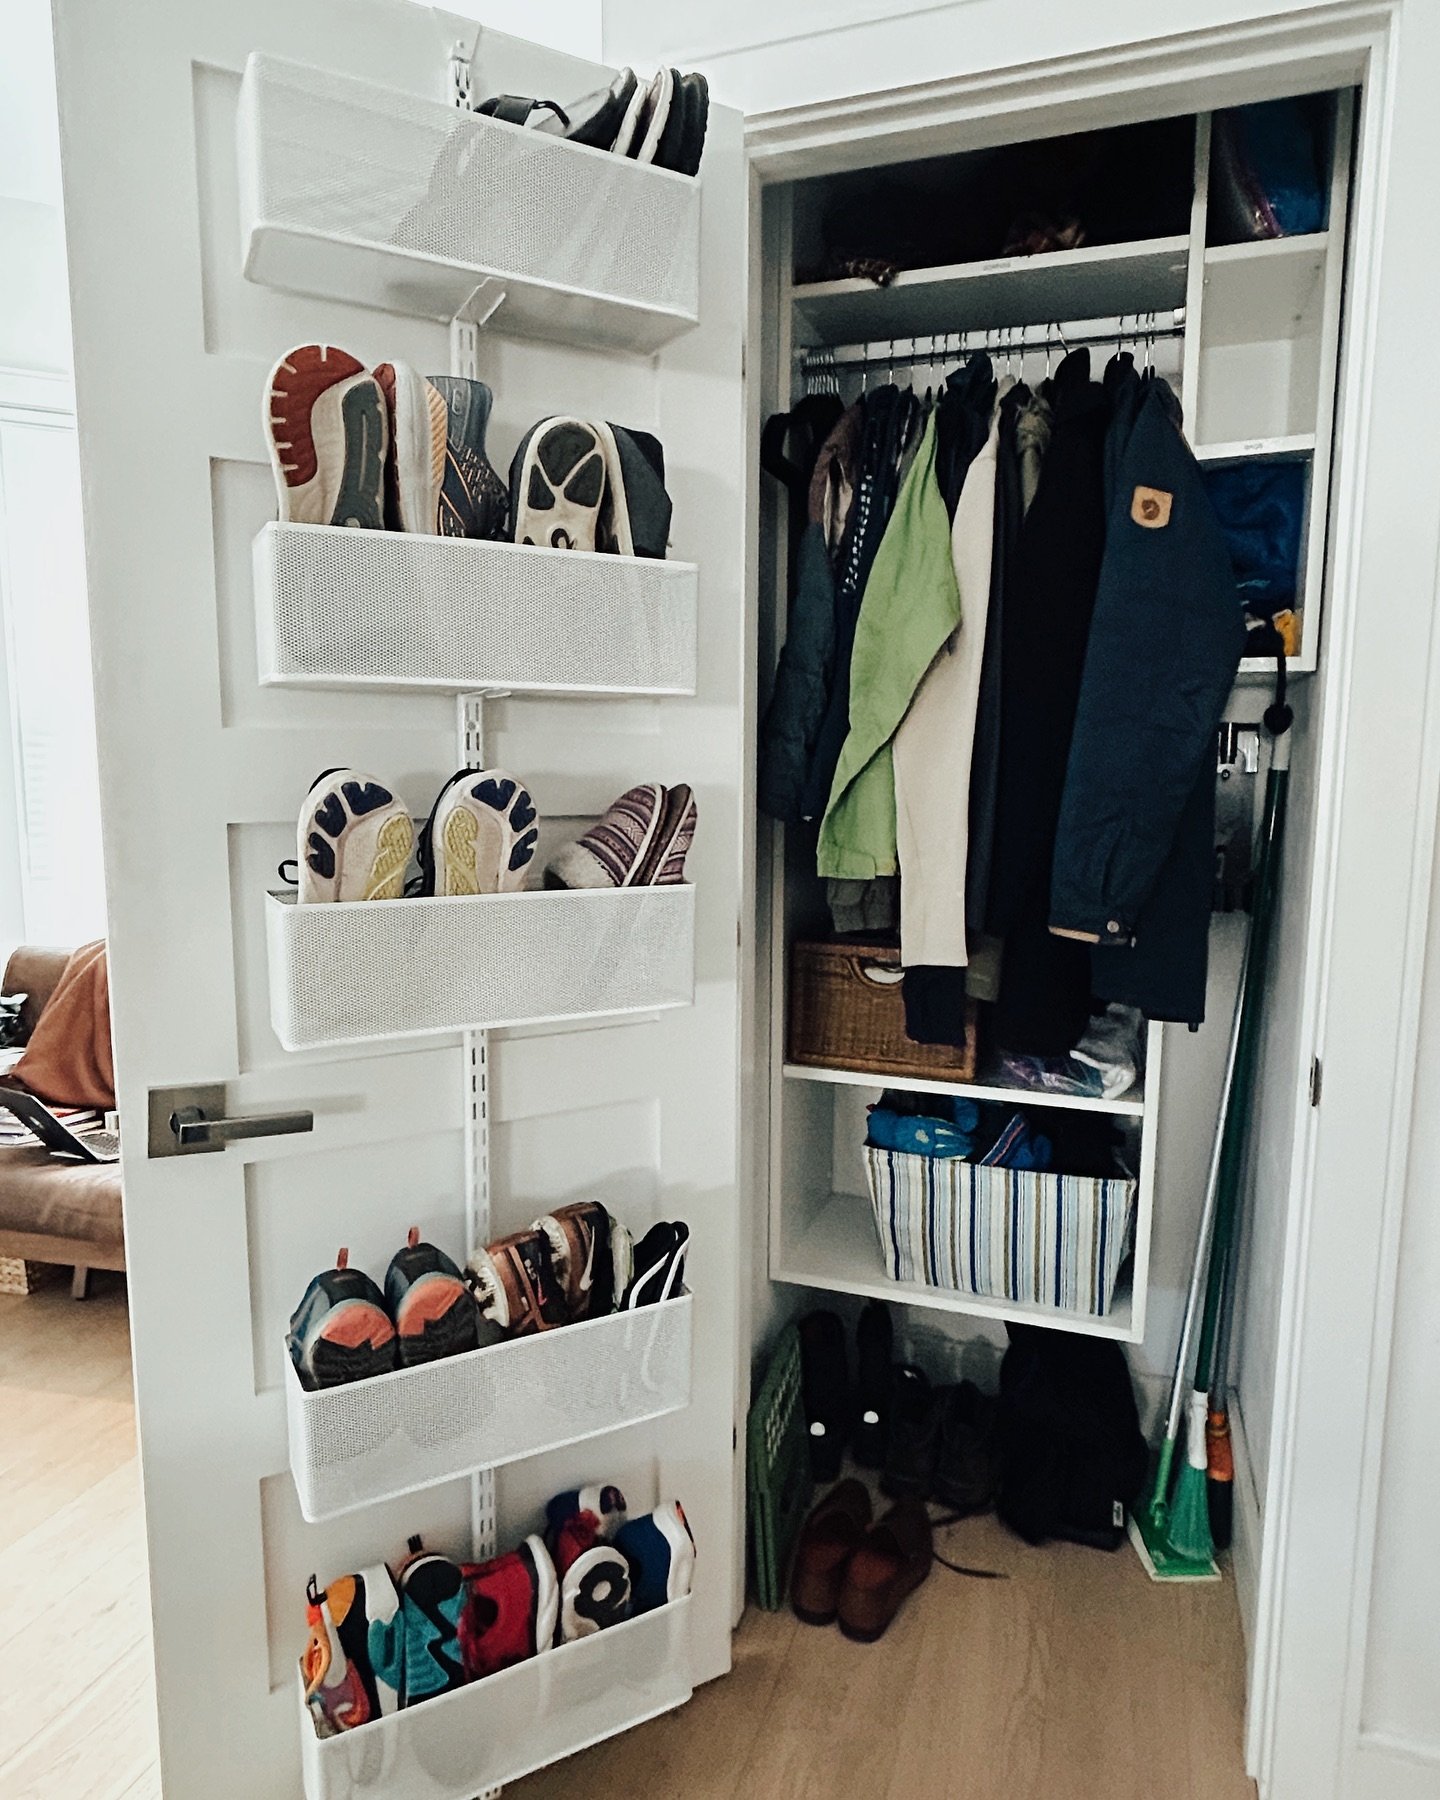 Just when you thought the closet was completely full, here I come reminding you to utilize ALL the space available by using vertical storage solutions 💁🏻&zwj;♀️

#homeorganization #homeorganizer #declutteryourlife #declutteryourhome #declutterlikea